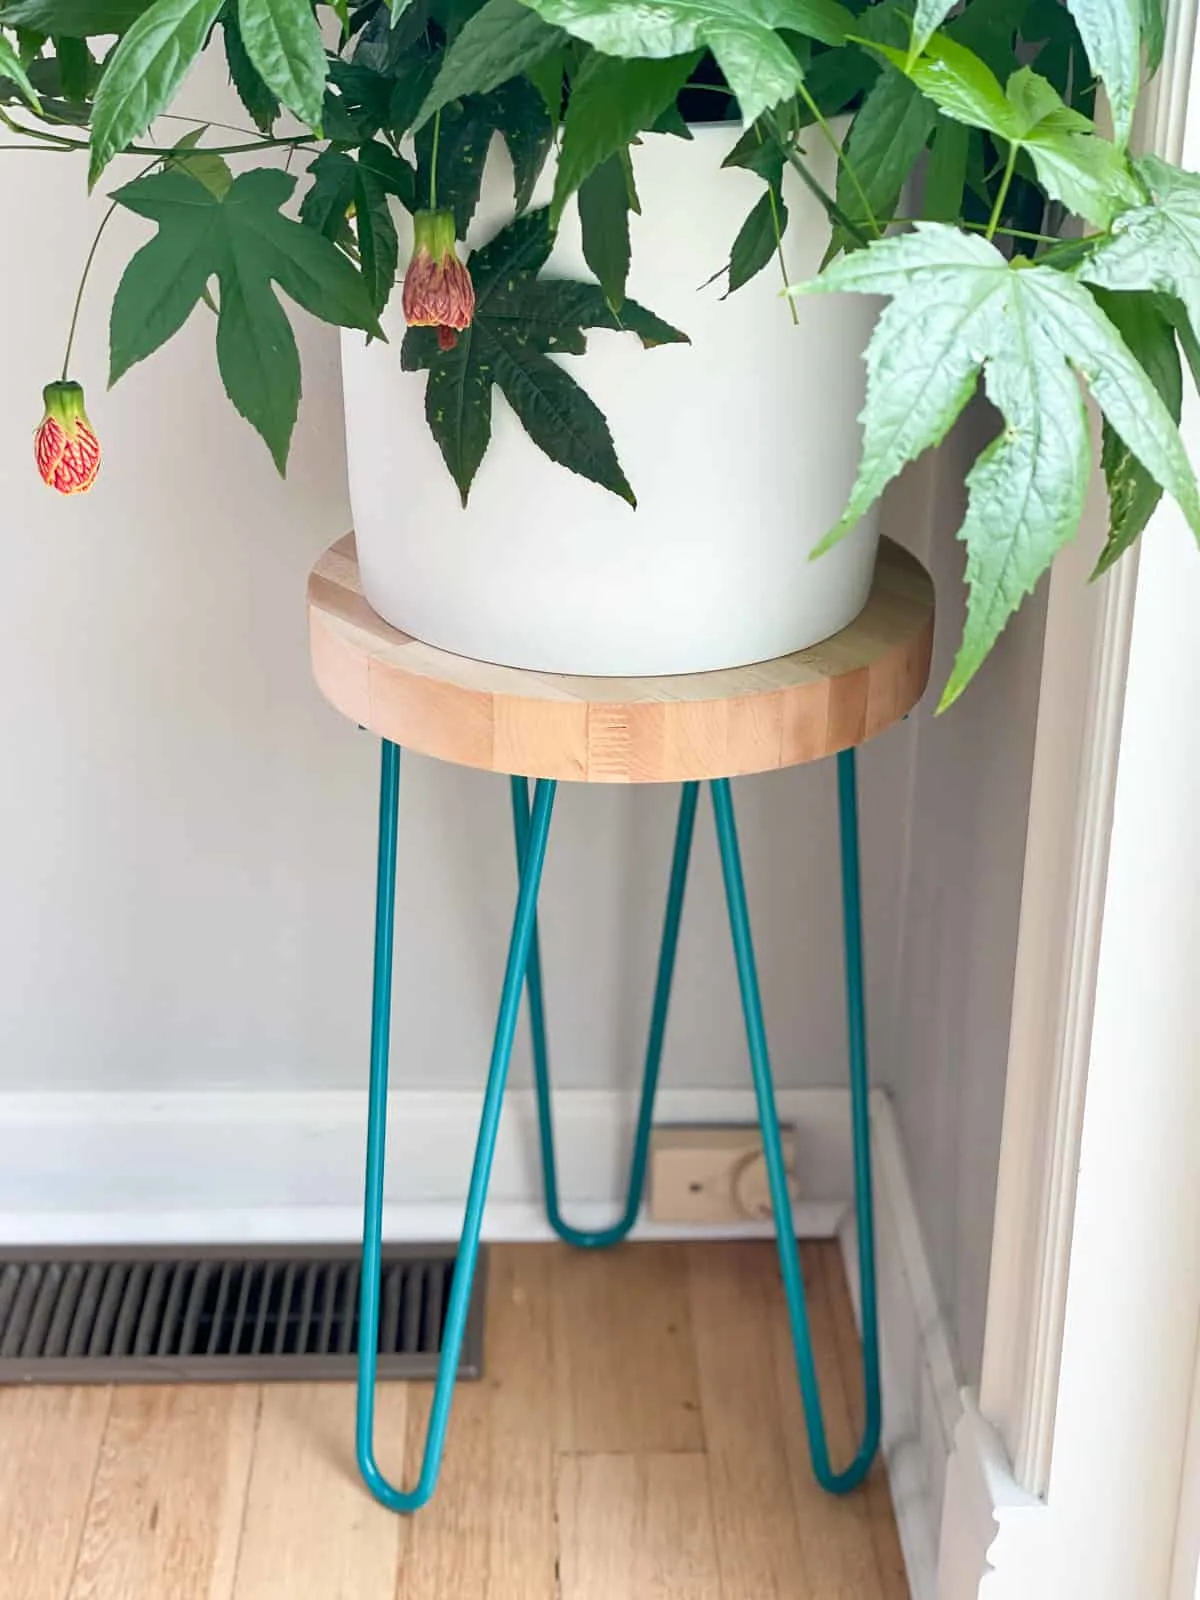 10 inch pot on DIY hairpin plant stand